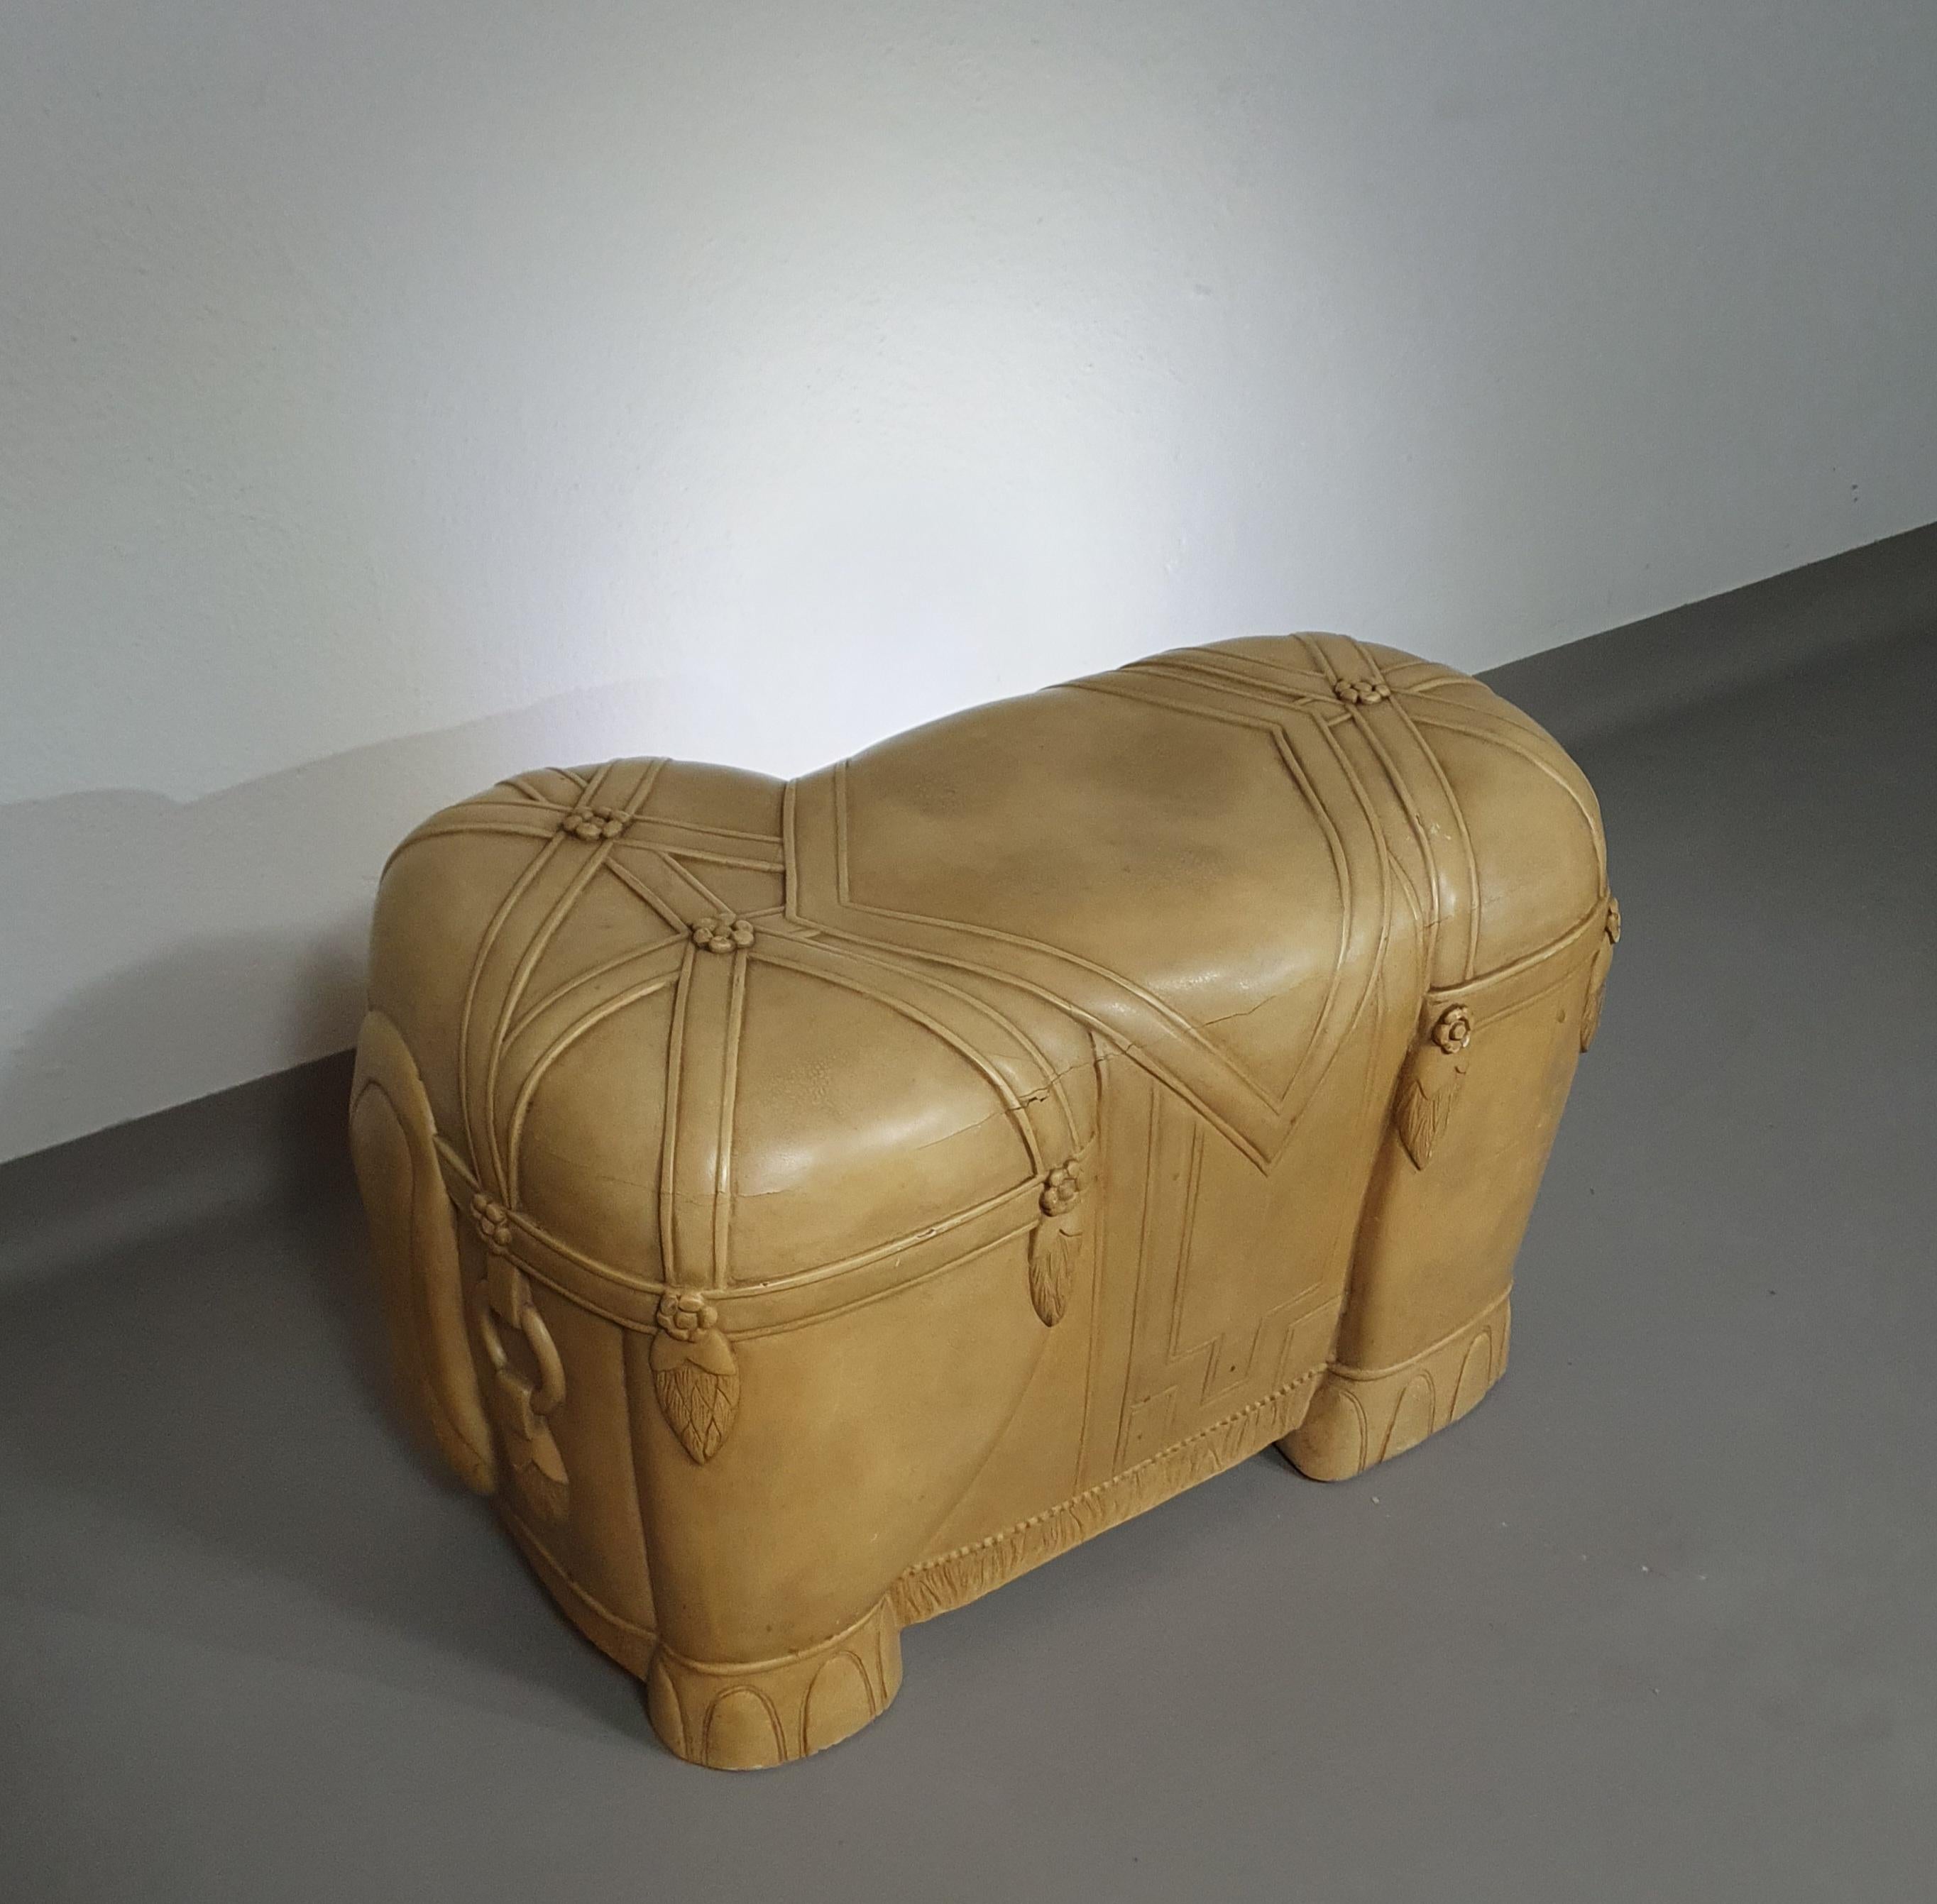 Decorative wood and resin elephant form table For Sale 14